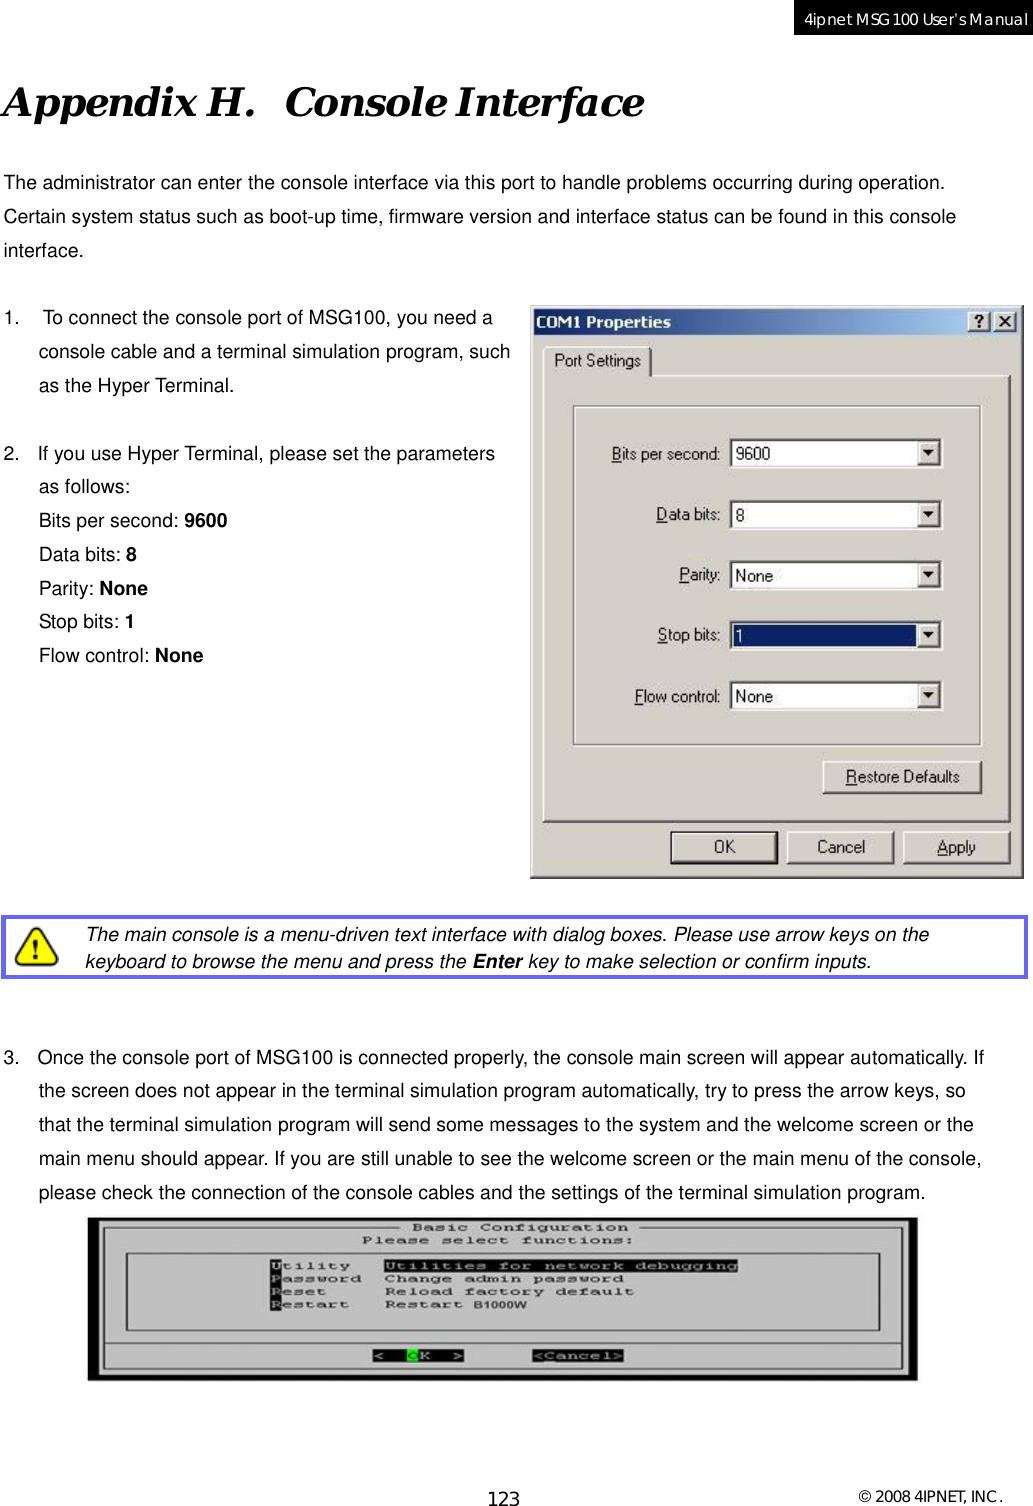  © 2008 4IPNET, INC. 123 4ipnet MSG100 User’s Manual  Appendix H.  Console Interface The administrator can enter the console interface via this port to handle problems occurring during operation. Certain system status such as boot-up time, firmware version and interface status can be found in this console interface.  1.  To connect the console port of MSG100, you need a console cable and a terminal simulation program, such as the Hyper Terminal.   2. If you use Hyper Terminal, please set the parameters as follows: Bits per second: 9600 Data bits: 8  Parity: None Stop bits: 1 Flow control: None          The main console is a menu-driven text interface with dialog boxes. Please use arrow keys on the keyboard to browse the menu and press the Enter key to make selection or confirm inputs.   3. Once the console port of MSG100 is connected properly, the console main screen will appear automatically. If the screen does not appear in the terminal simulation program automatically, try to press the arrow keys, so that the terminal simulation program will send some messages to the system and the welcome screen or the main menu should appear. If you are still unable to see the welcome screen or the main menu of the console, please check the connection of the console cables and the settings of the terminal simulation program.   